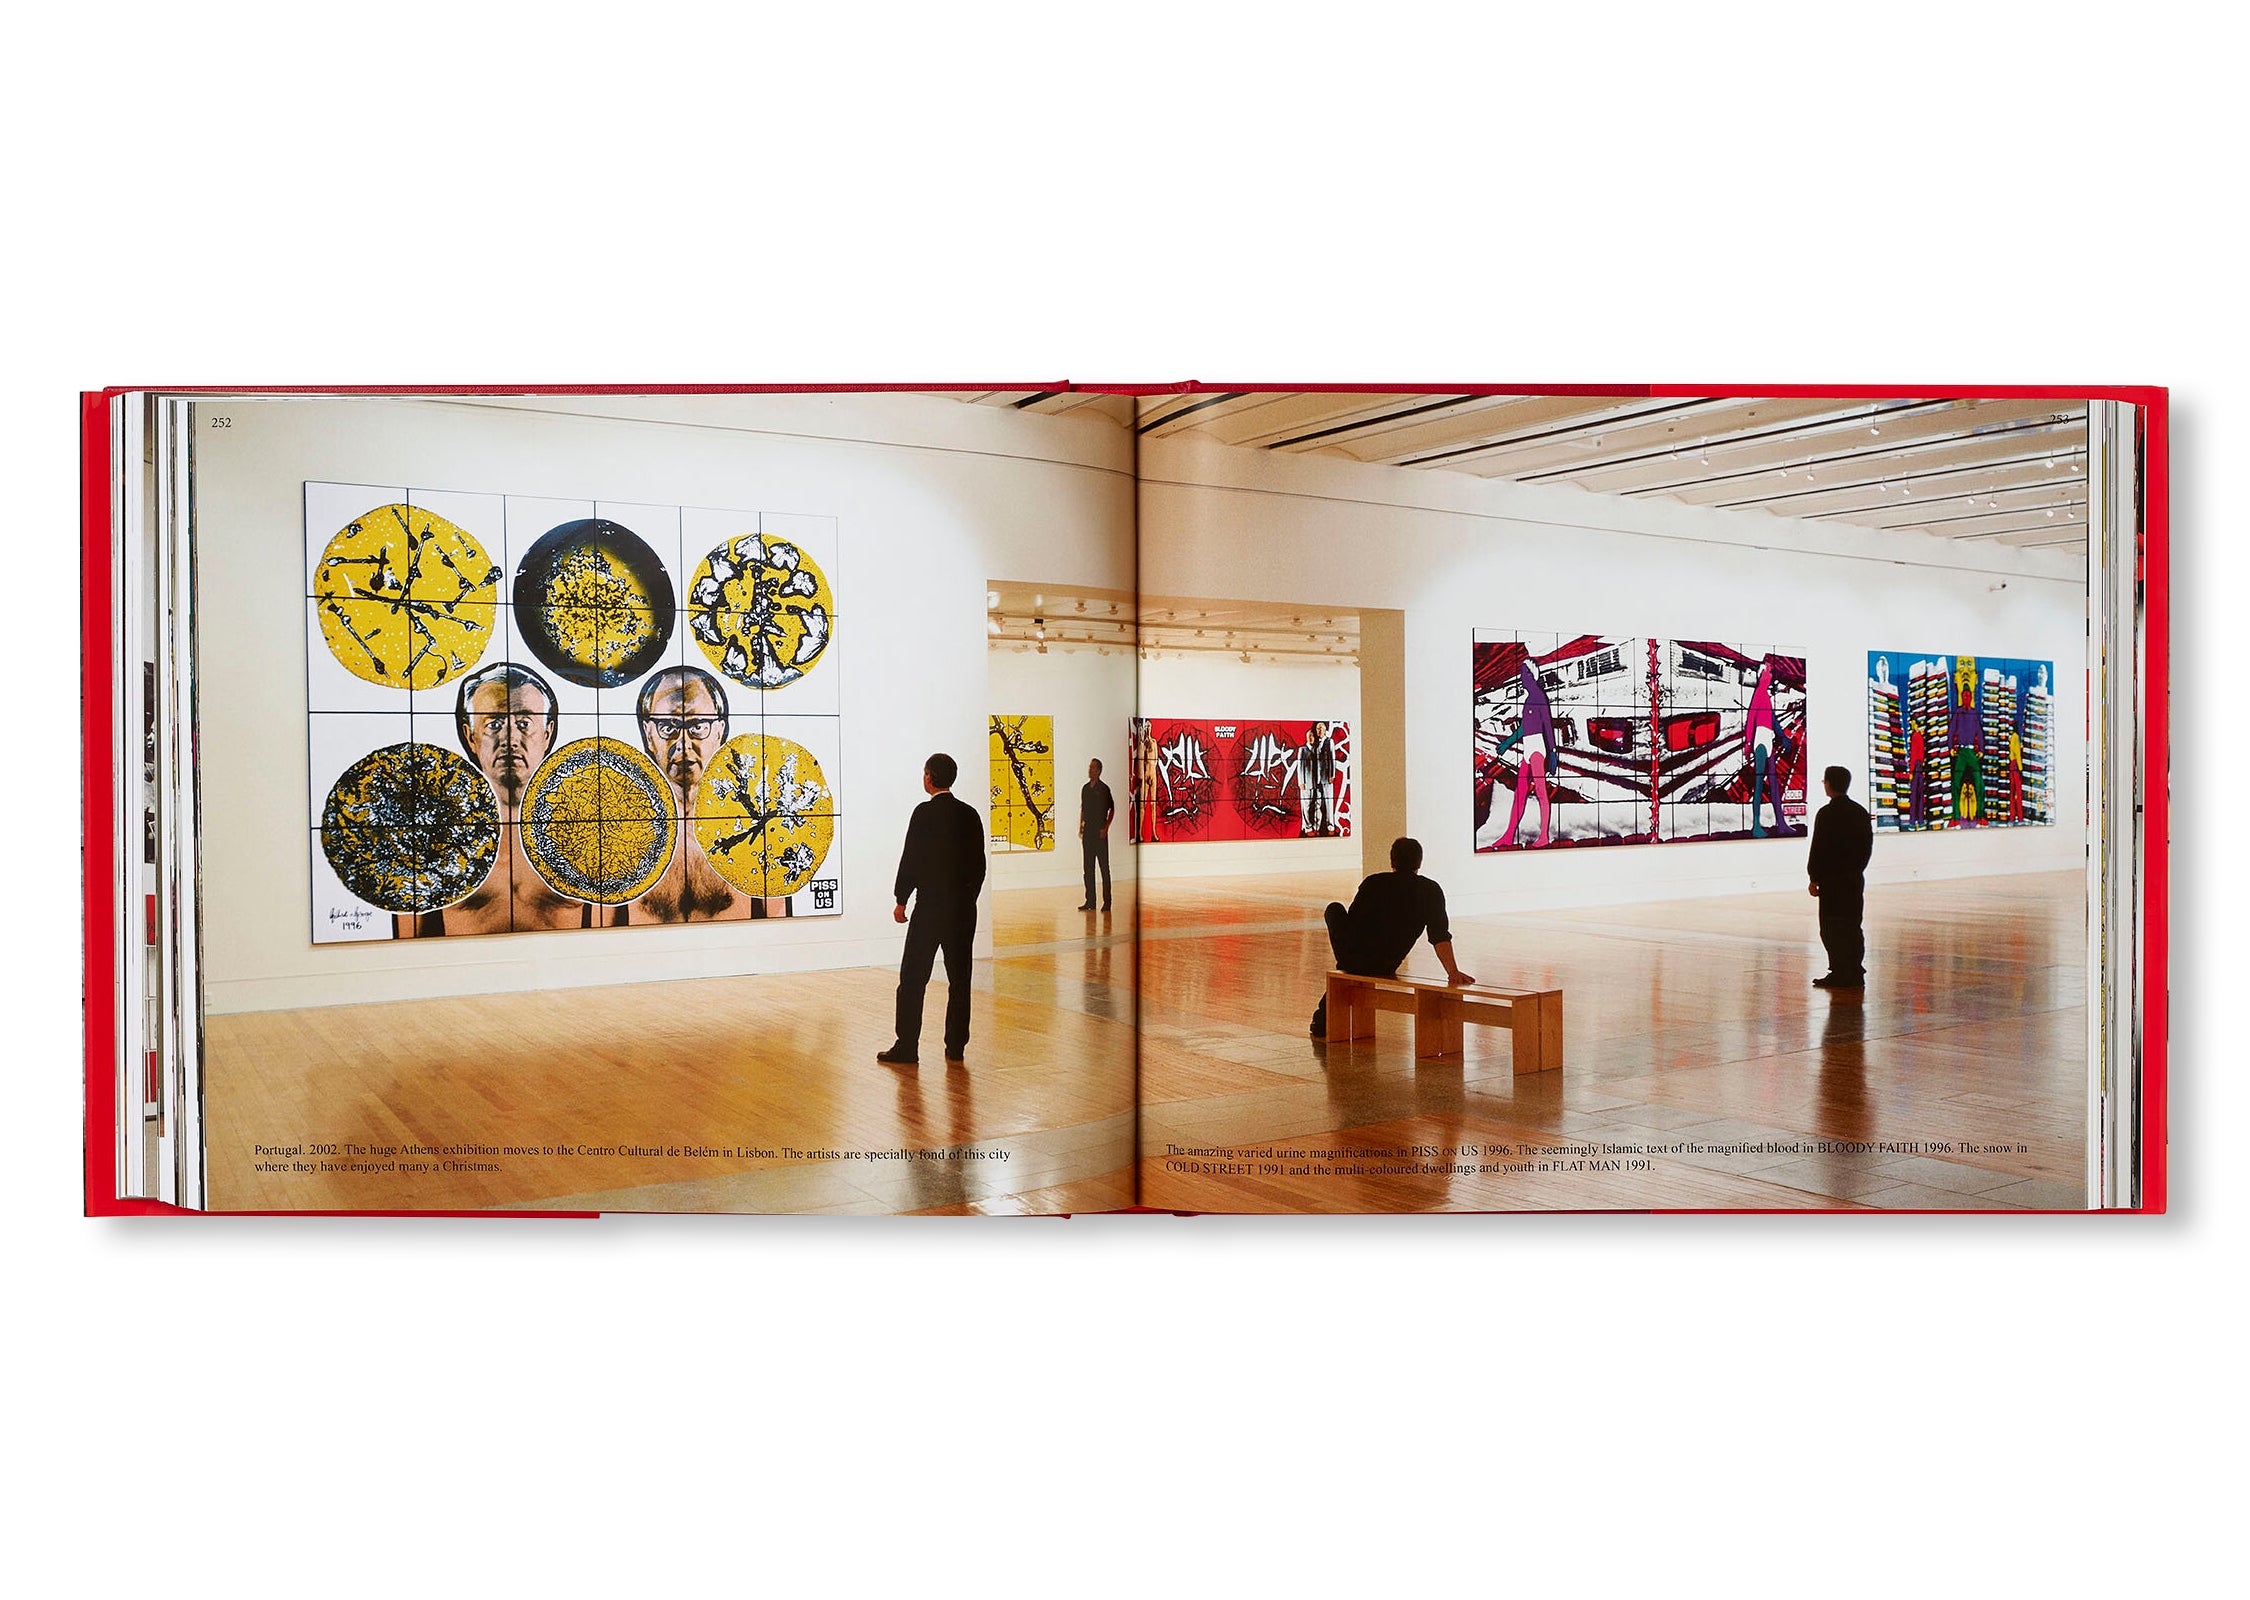 THE GREAT EXHIBITION by Gilbert and George